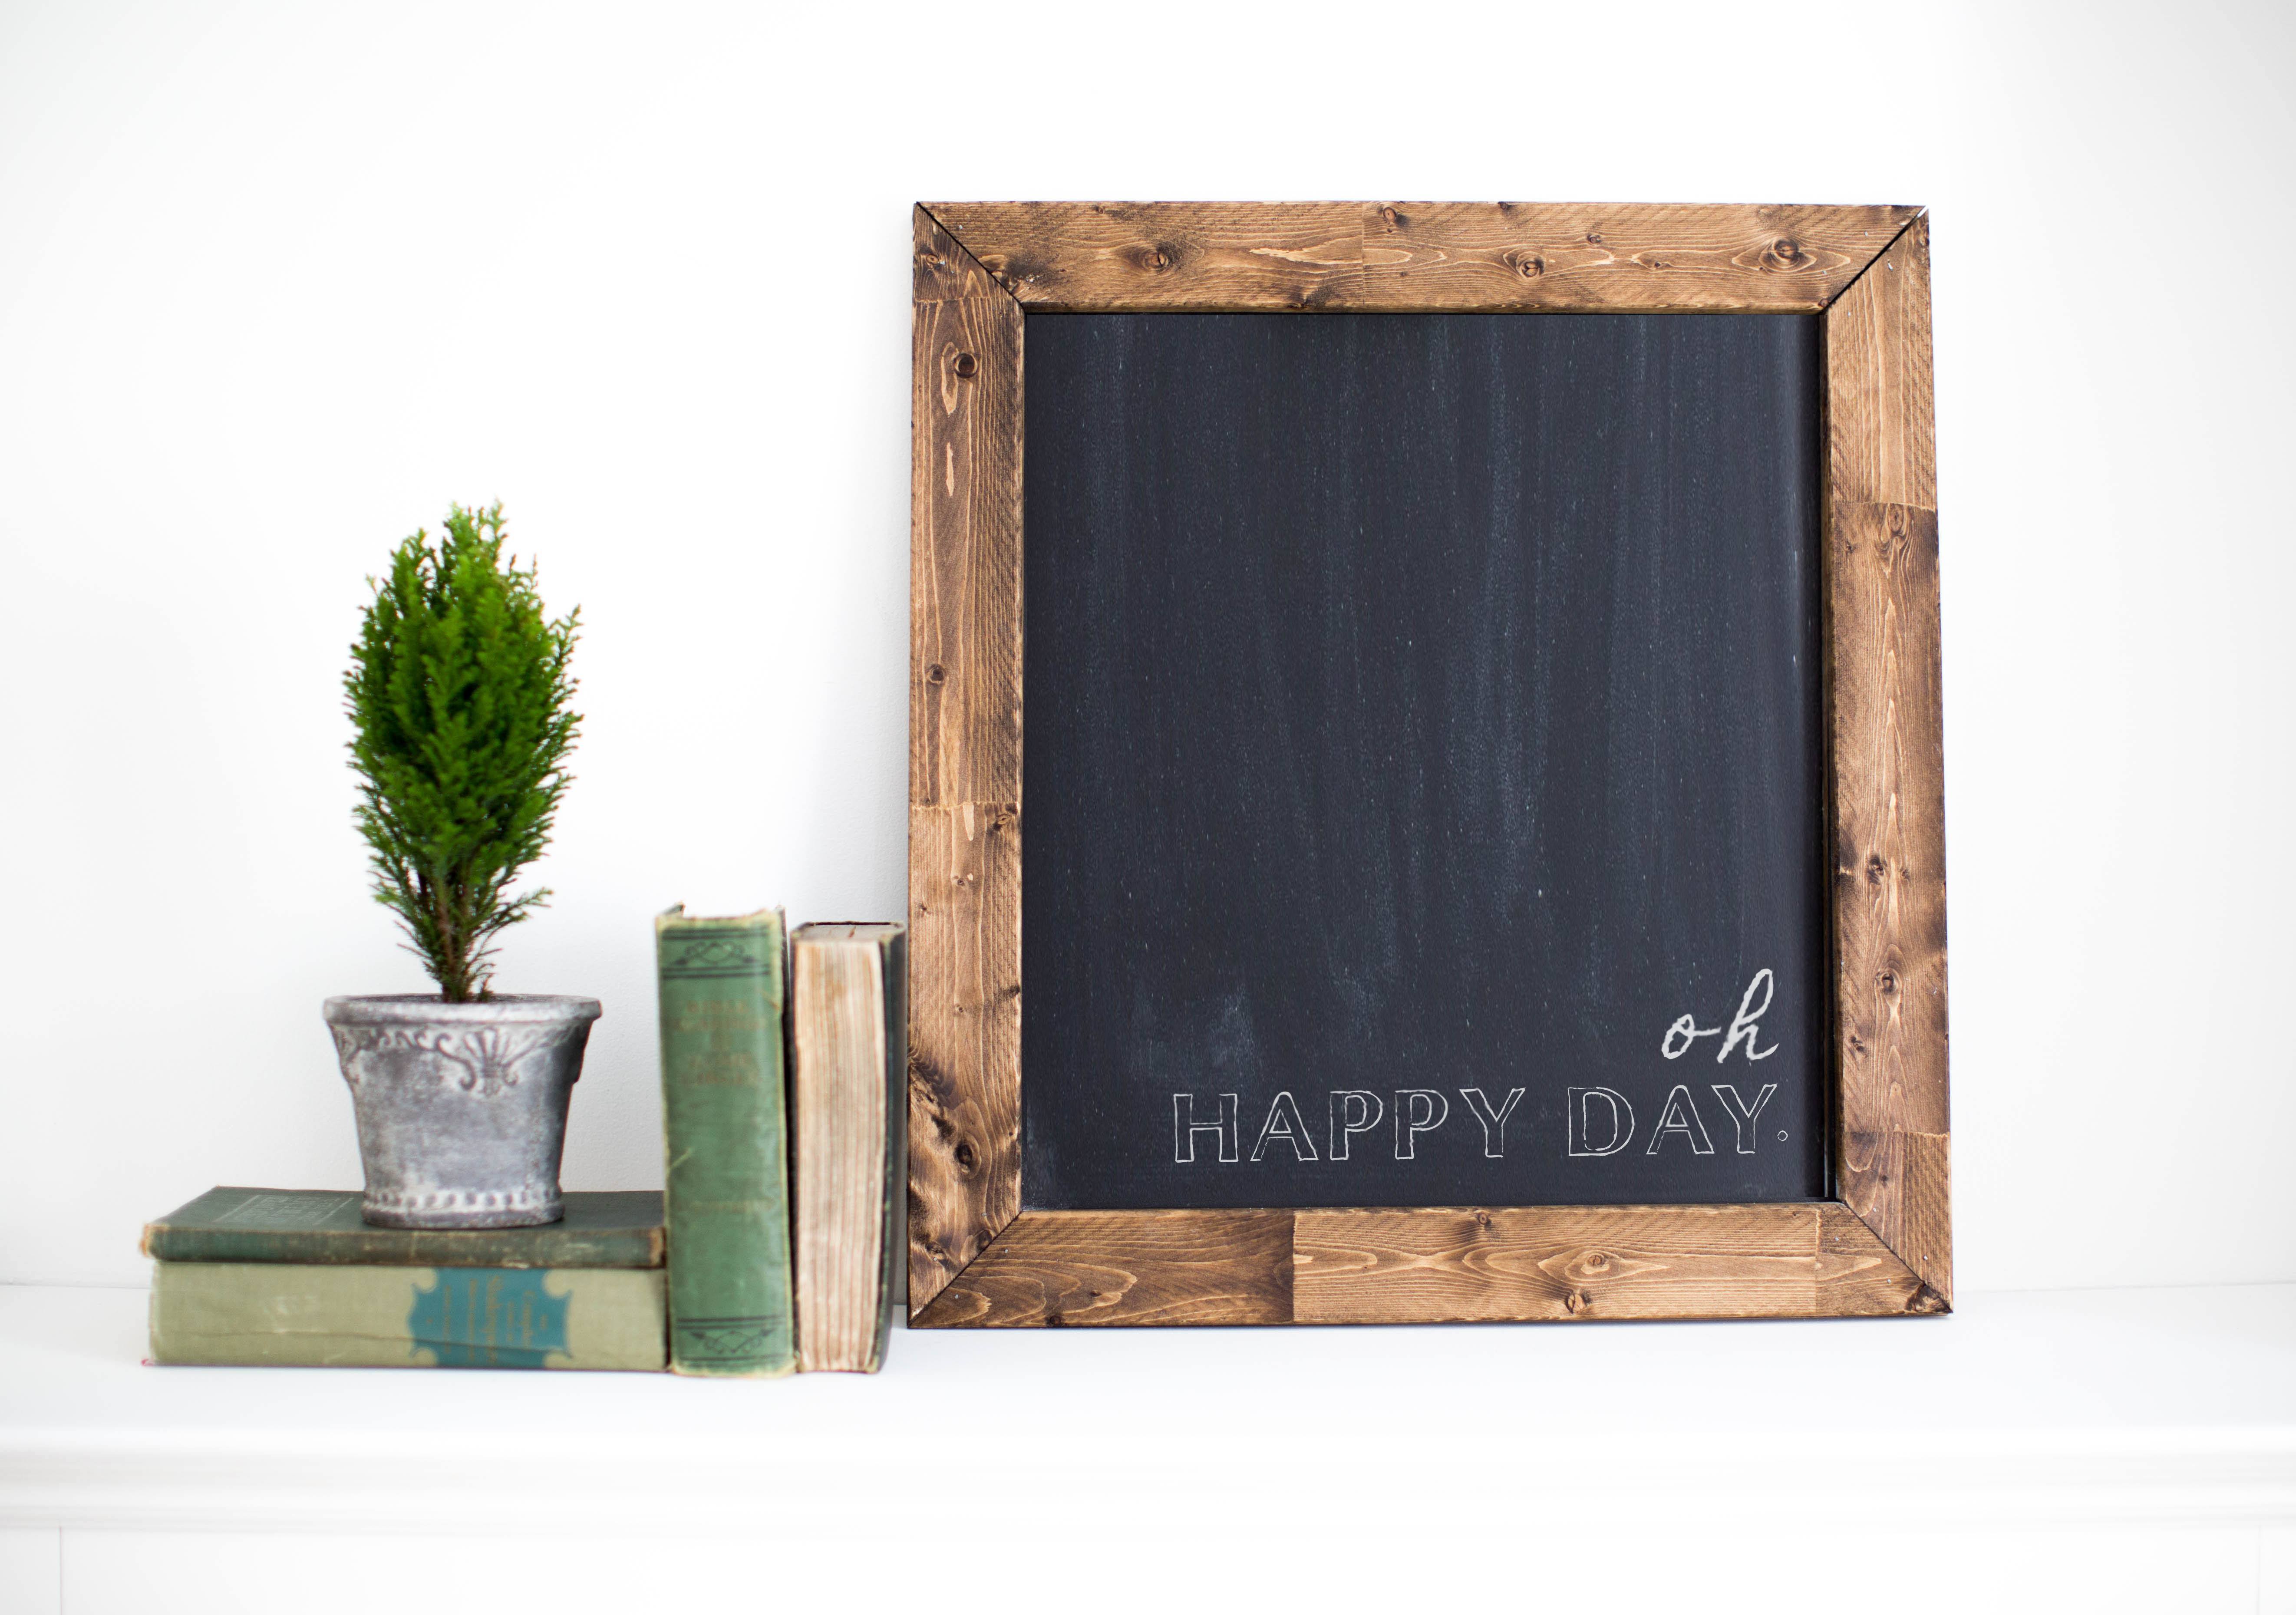 DIY Magnetic Chalkboard | At Home: A Blog by Joanna Gaines